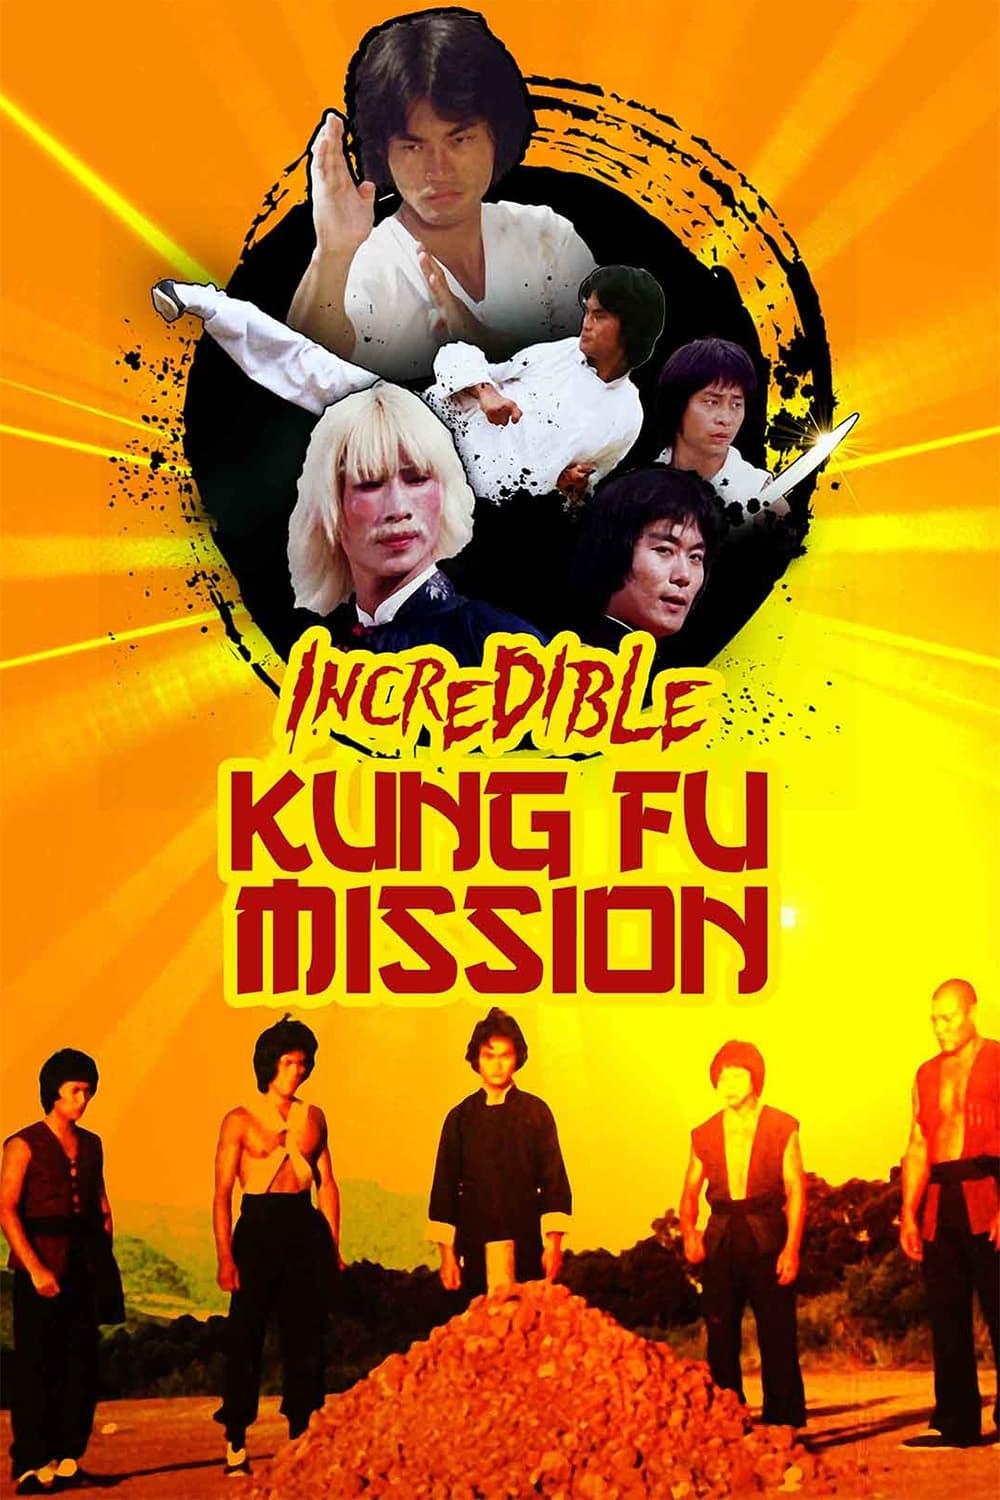 Incredible Kung Fu Mission poster